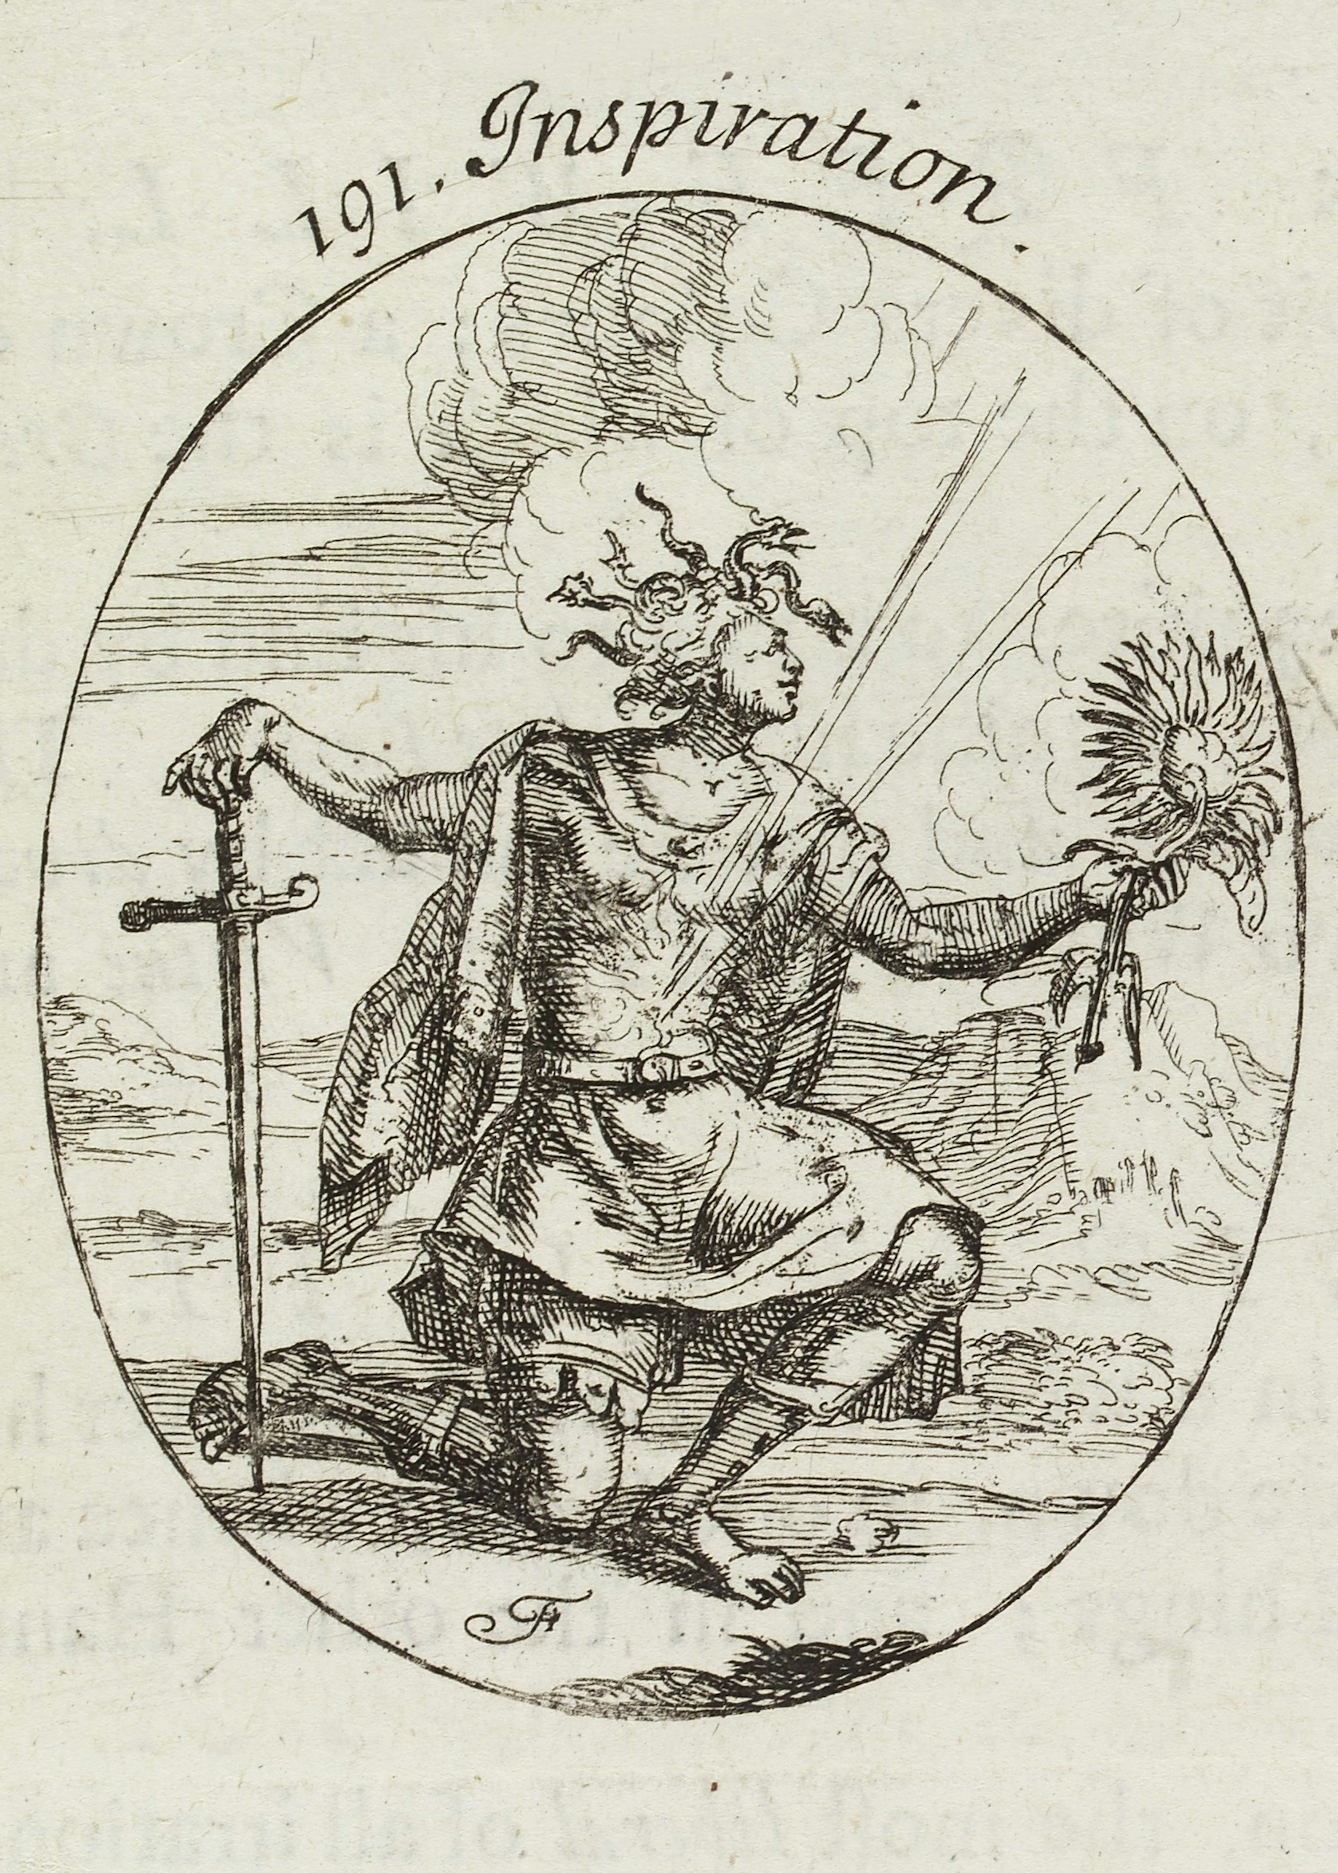 Black and white line engraving of a kneeling man being struck by what looks like lightning. The word ‘Inspiration’ is written above the image.